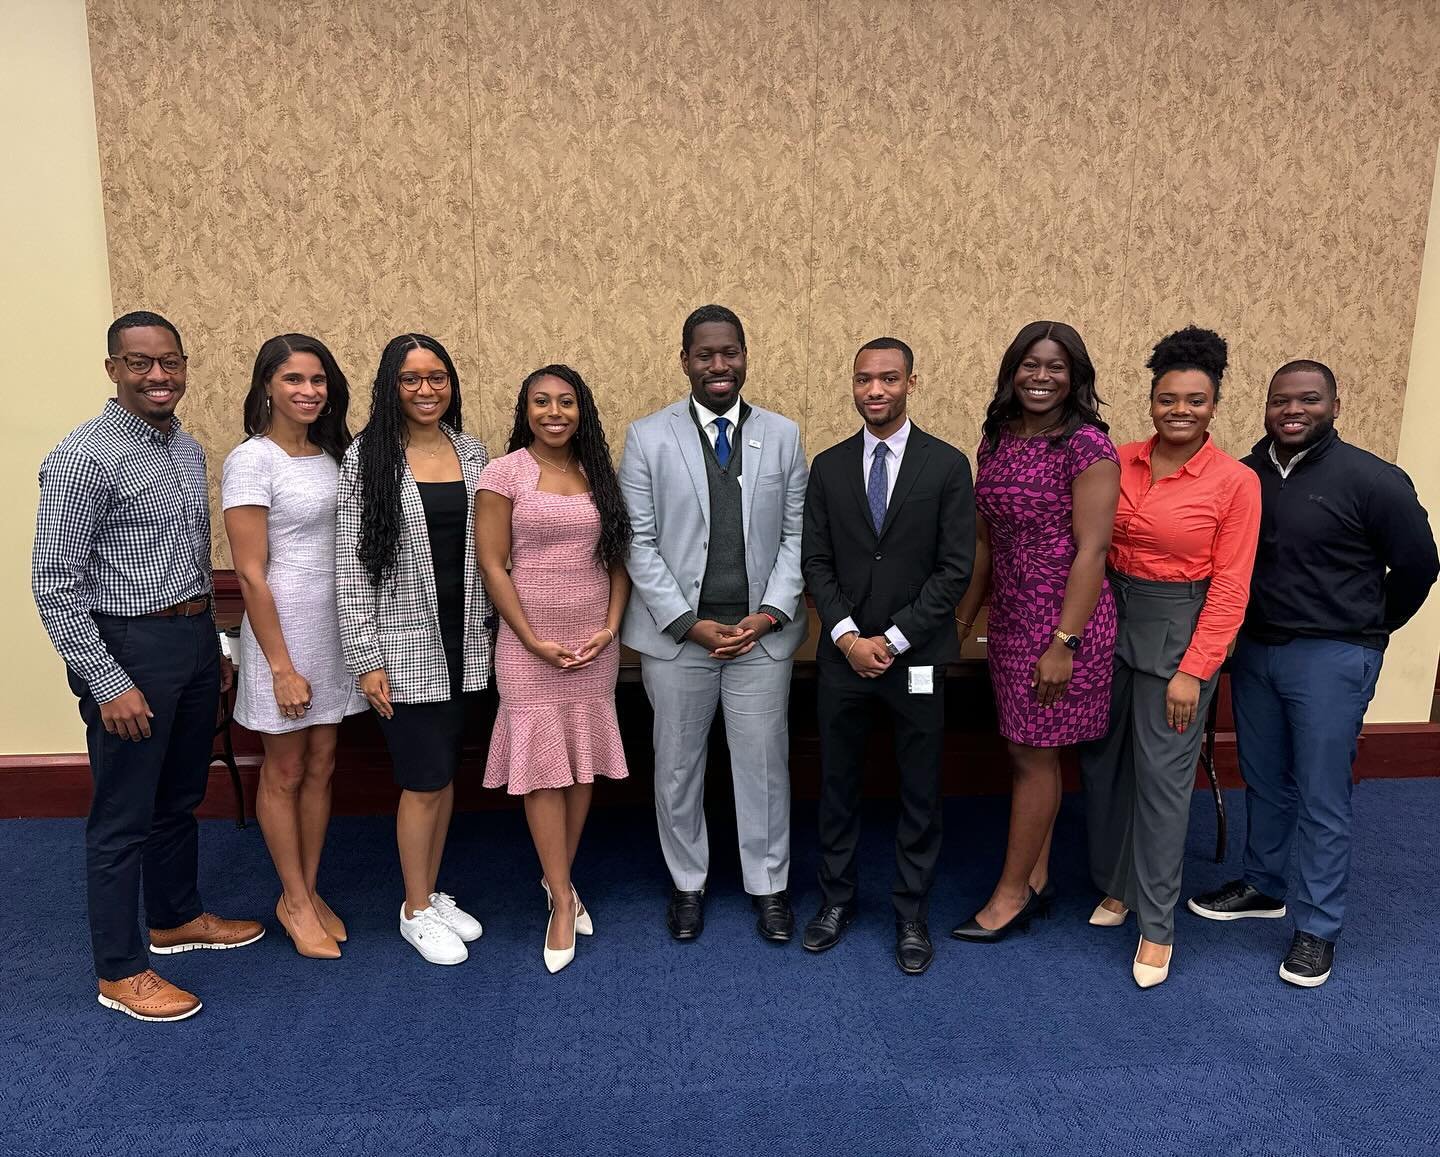 ICYMI, our last general body meeting CBA Vice President Iyanla Kollock invited Eric Morrissette to speak! 

He currently serves as the Interim Under Secretary of the Minority Business Development Agency at the U.S. Department of Commerce. 

He shared